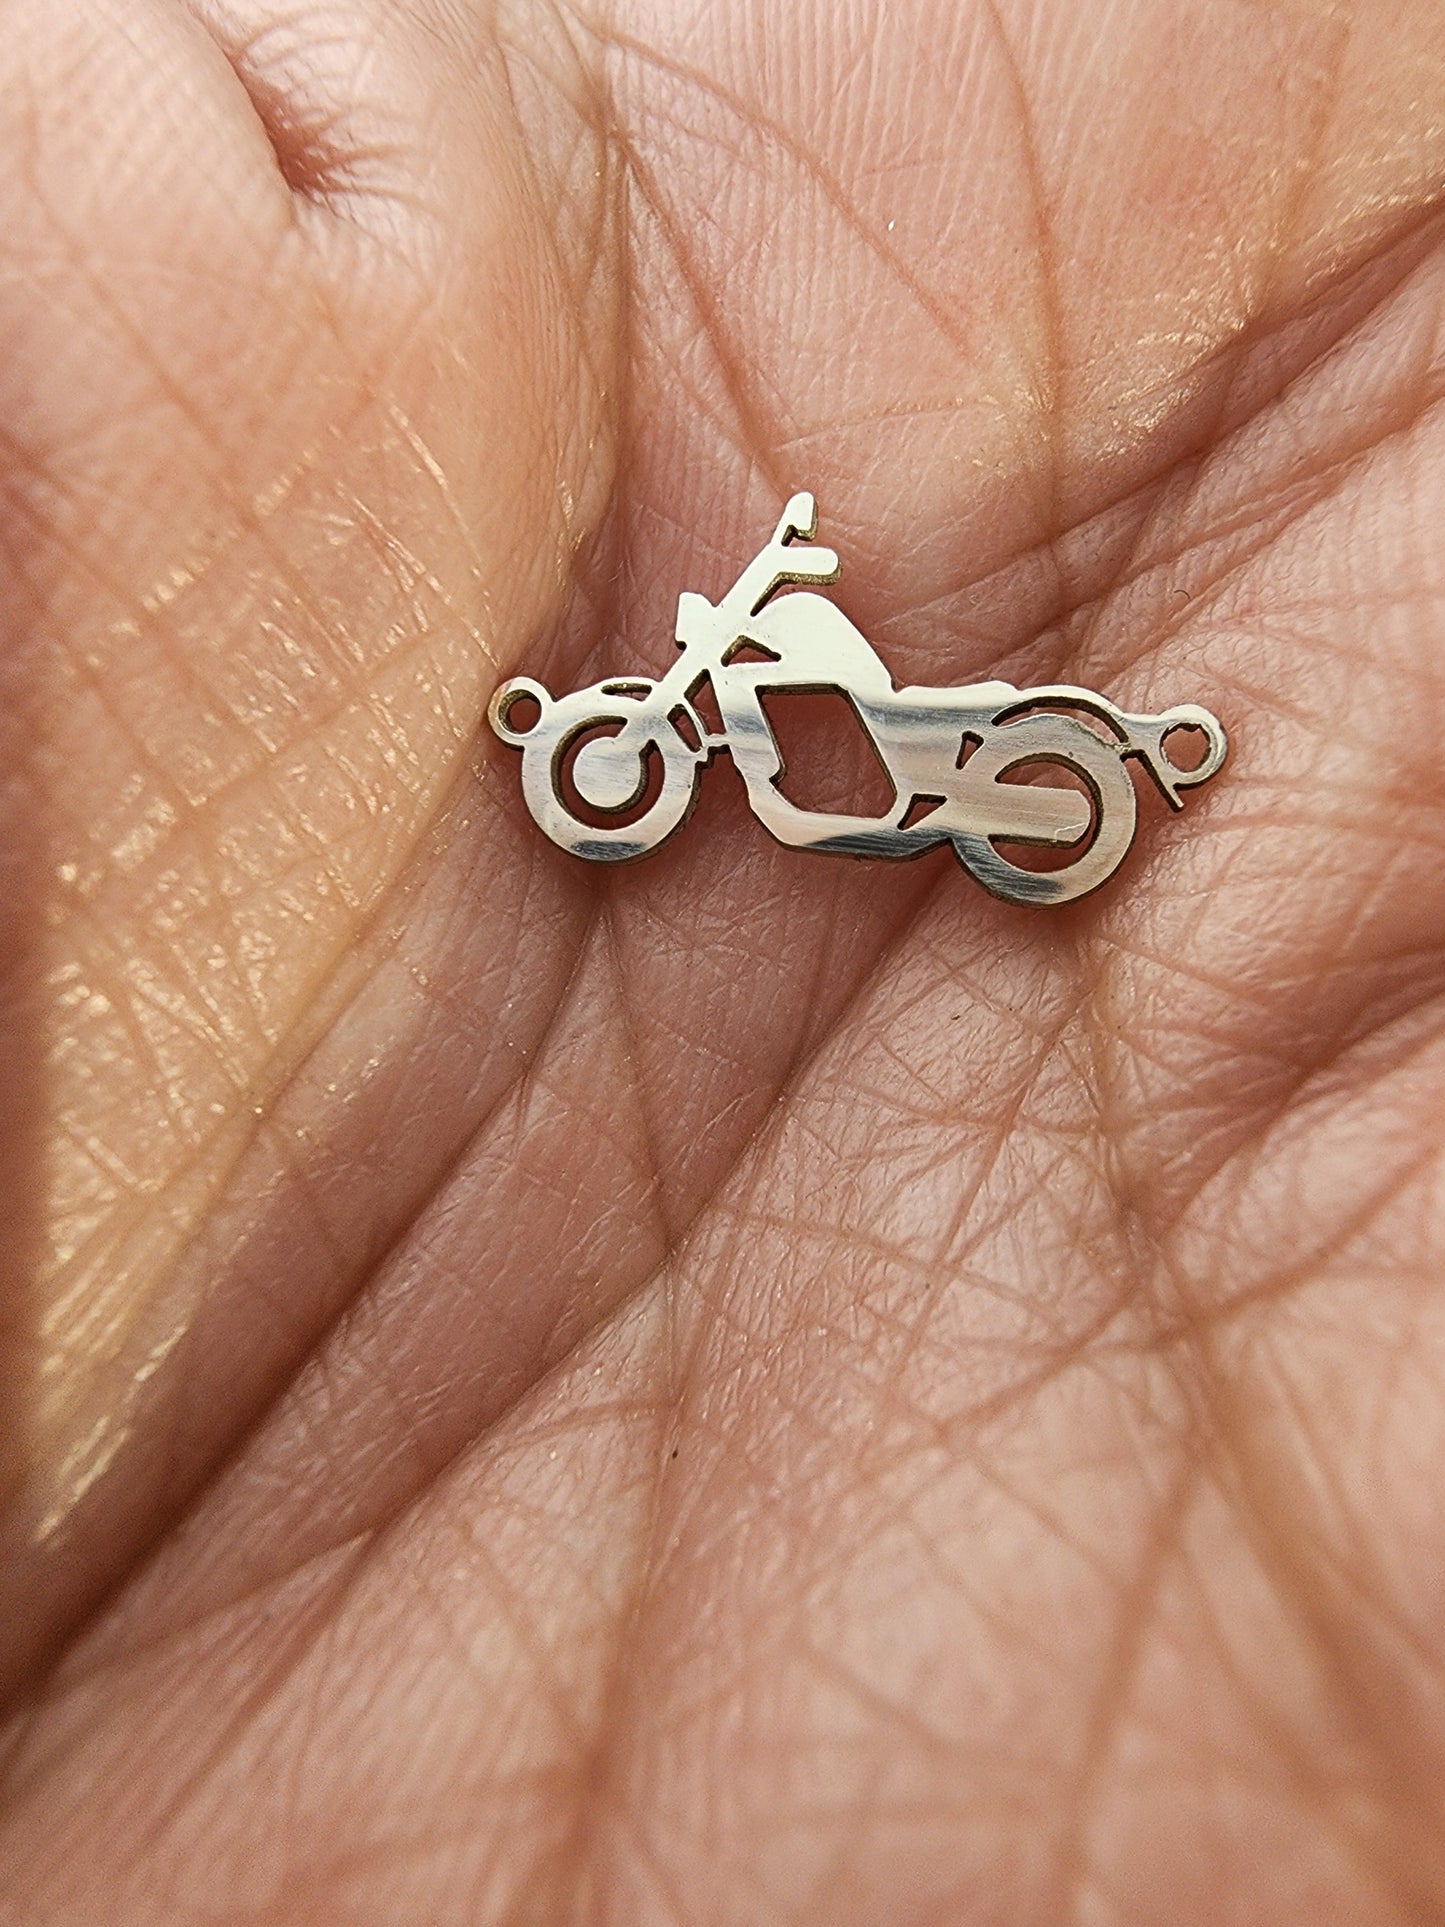 Motorcycle or Bike connector for permanent jewelry, gold filled, sterling silver, 14k and 10k gold